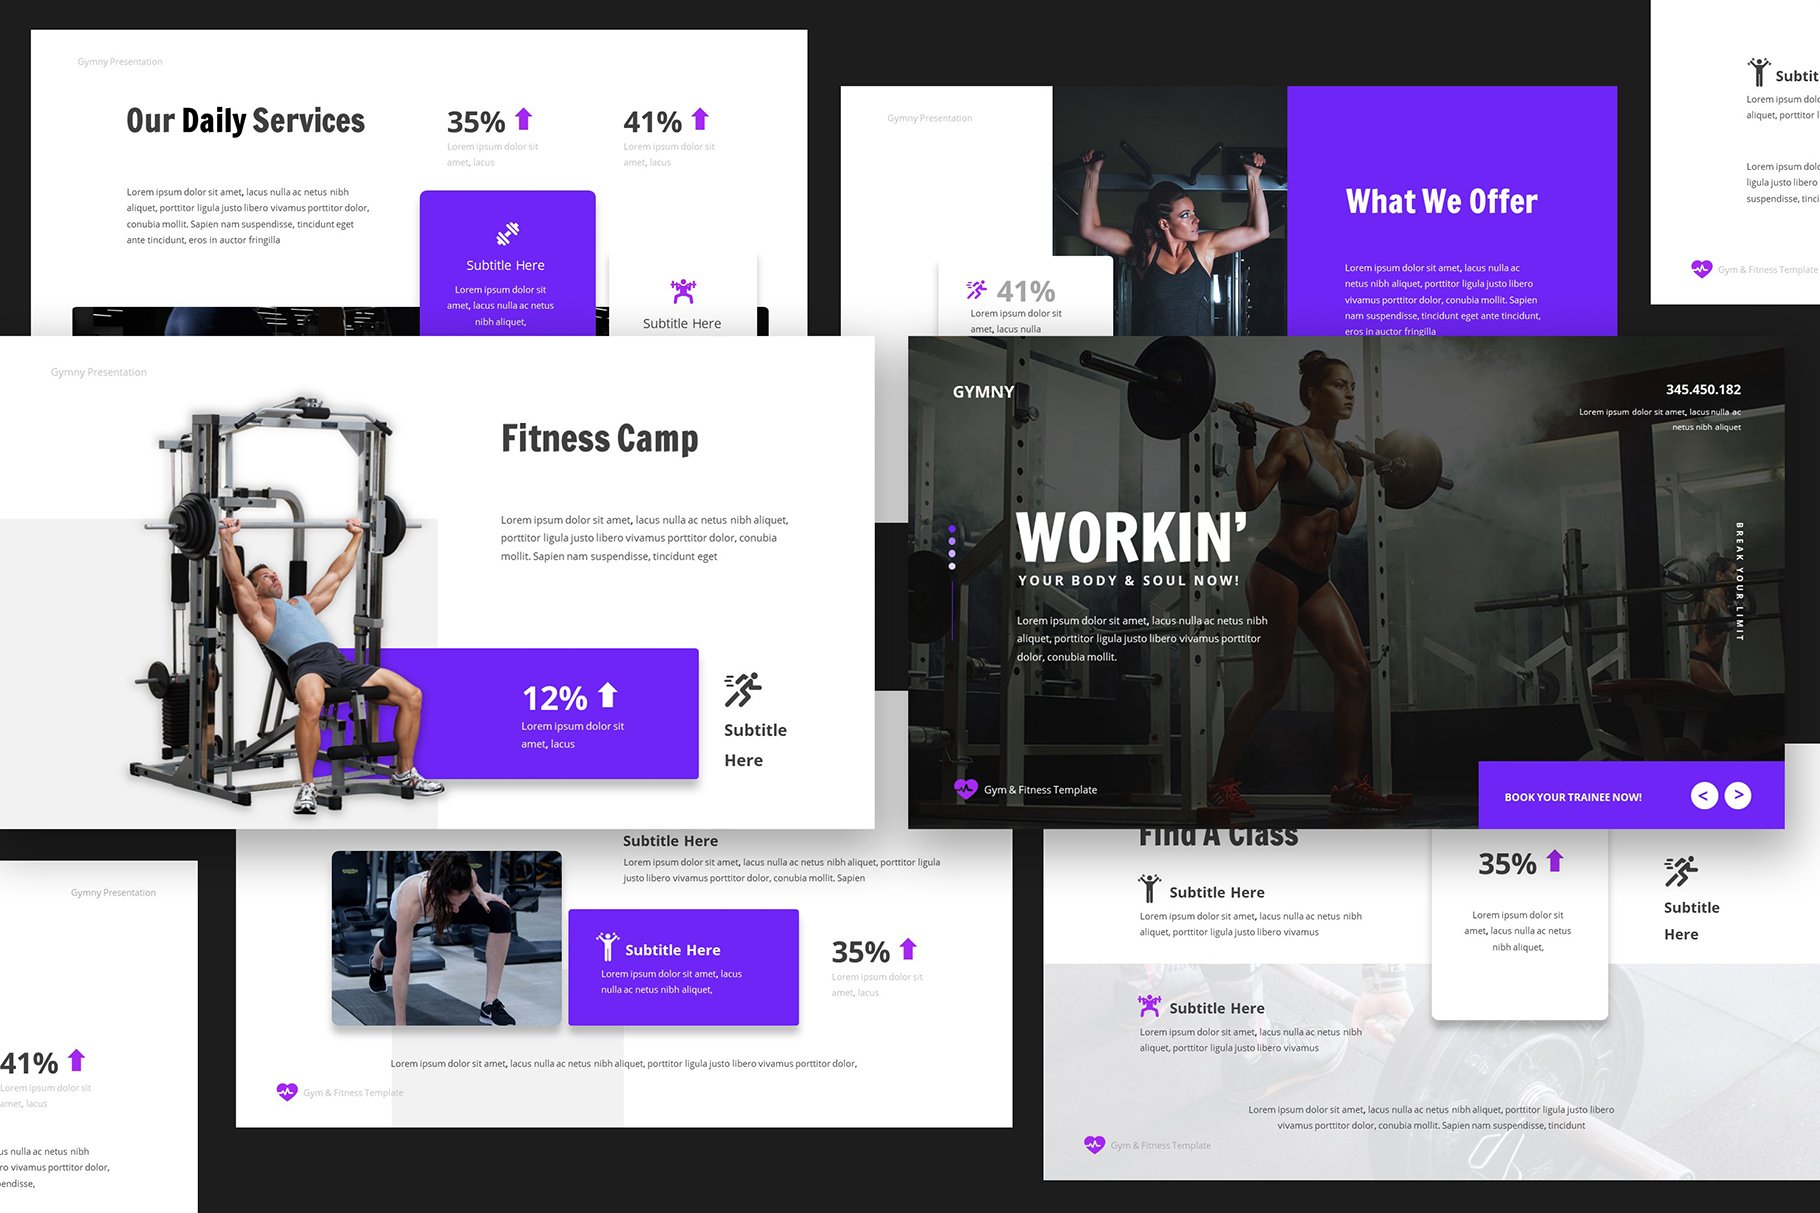 Template has color mix - purple and dark for your presentation.